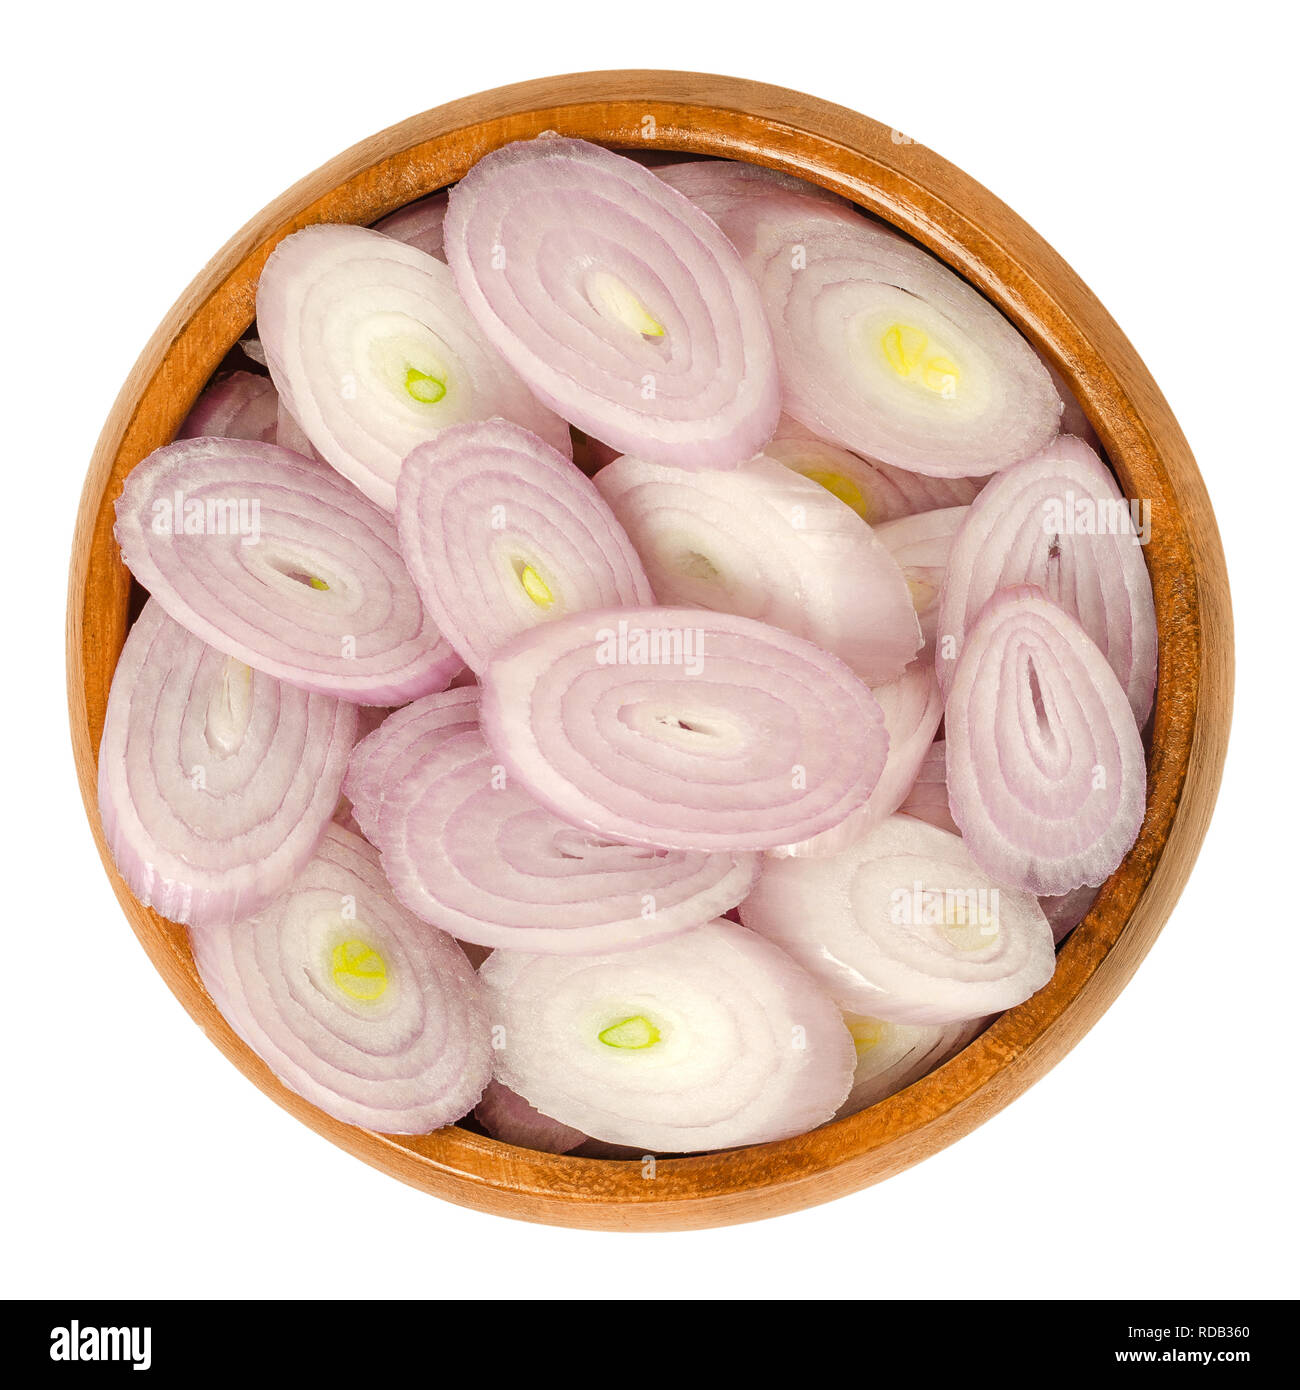 Sliced shallots in wooden bowl. Chopped. Rings. Type of onion and variety of Allium cepa. Purple, edible, raw, organic, vegan, plant. Stock Photo